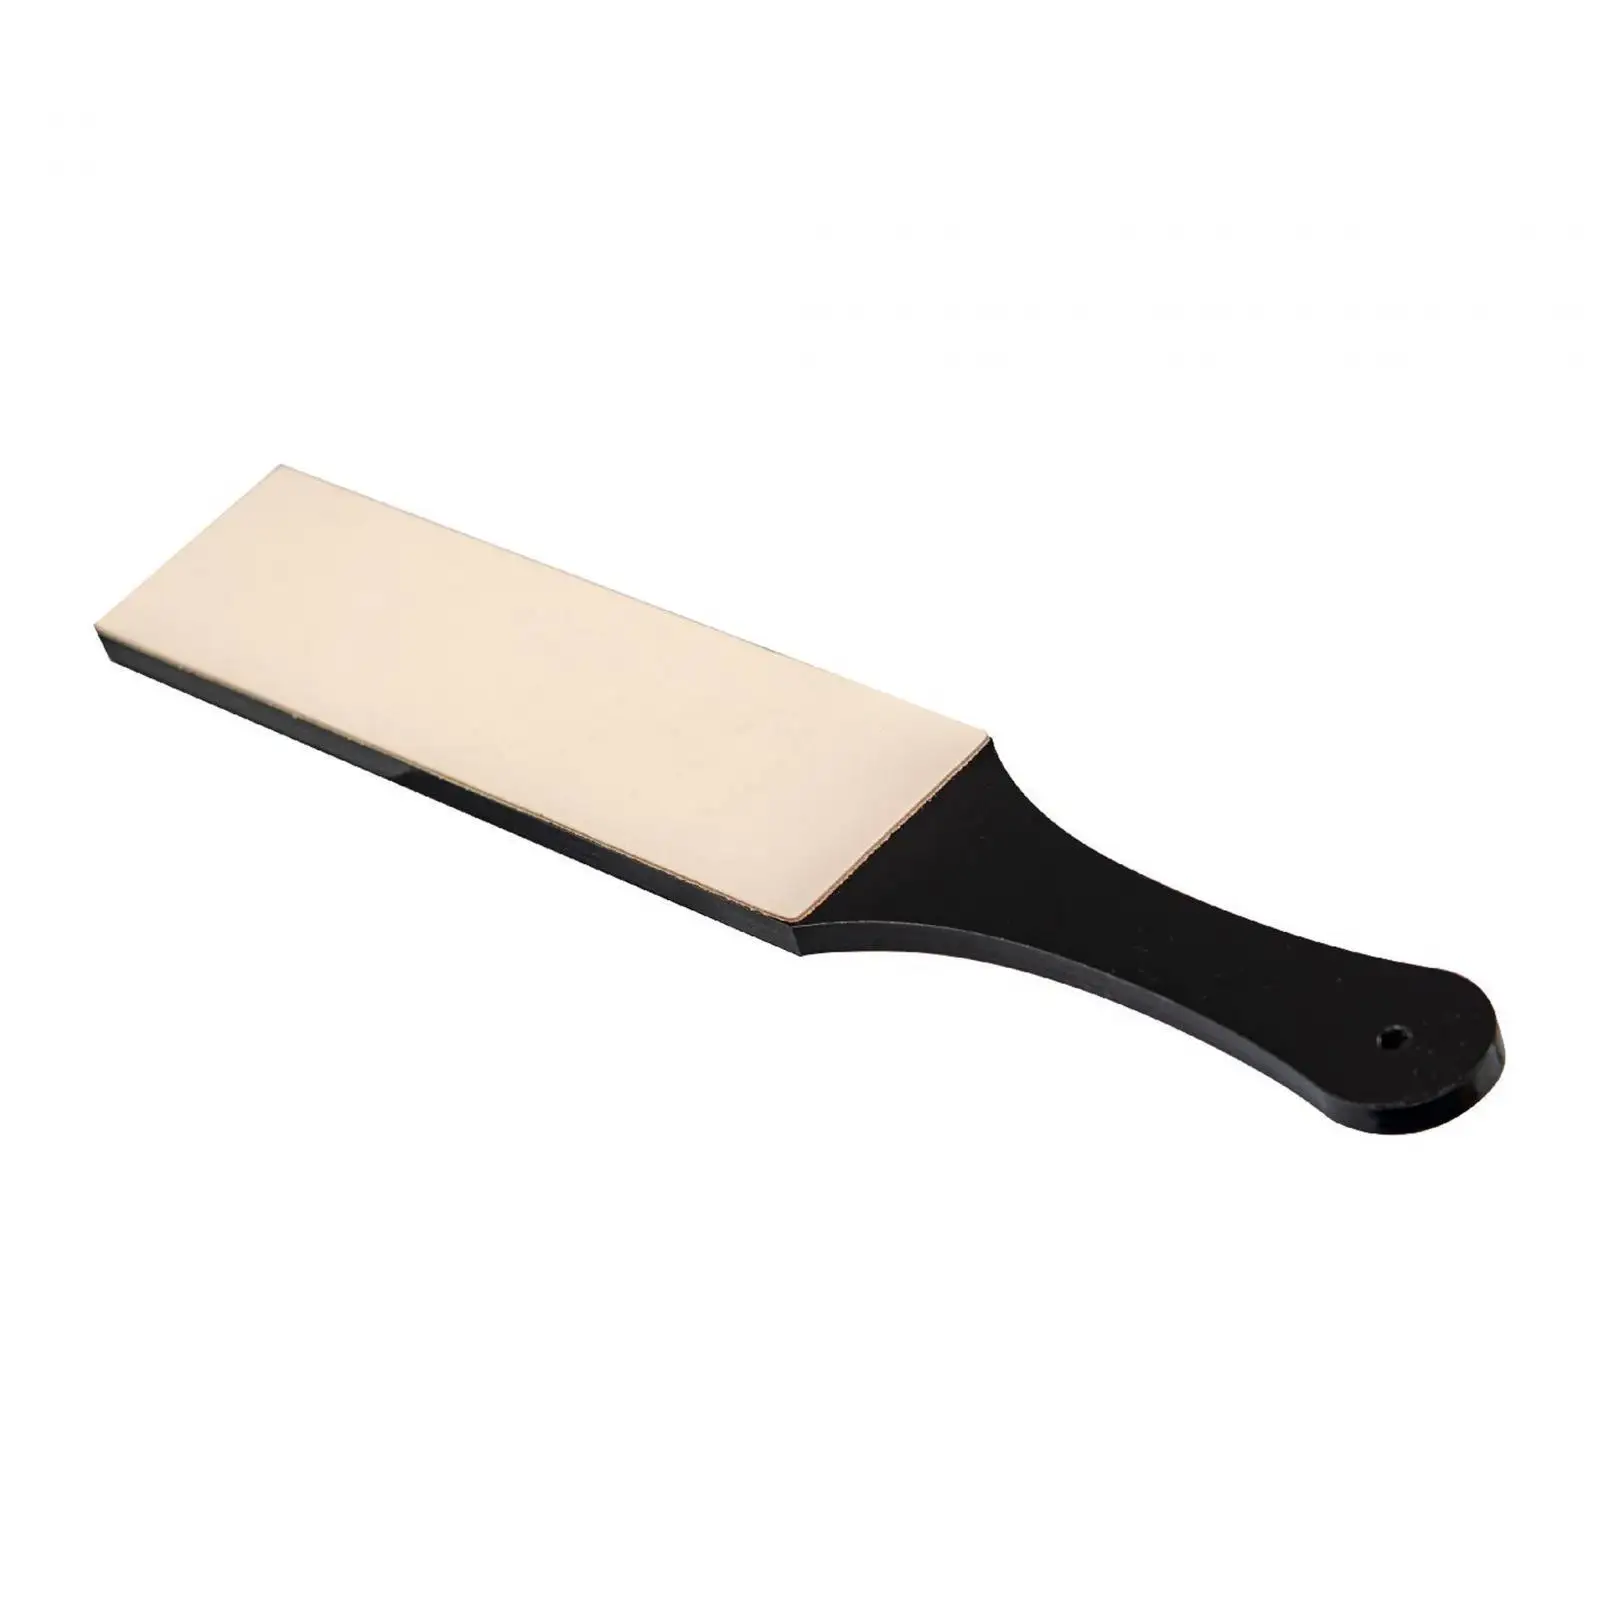 Honing Compound Sharpening Polishing Compound Sharpening Board Knife Stropping Block PU Leather Strop for Wood Carving Polish